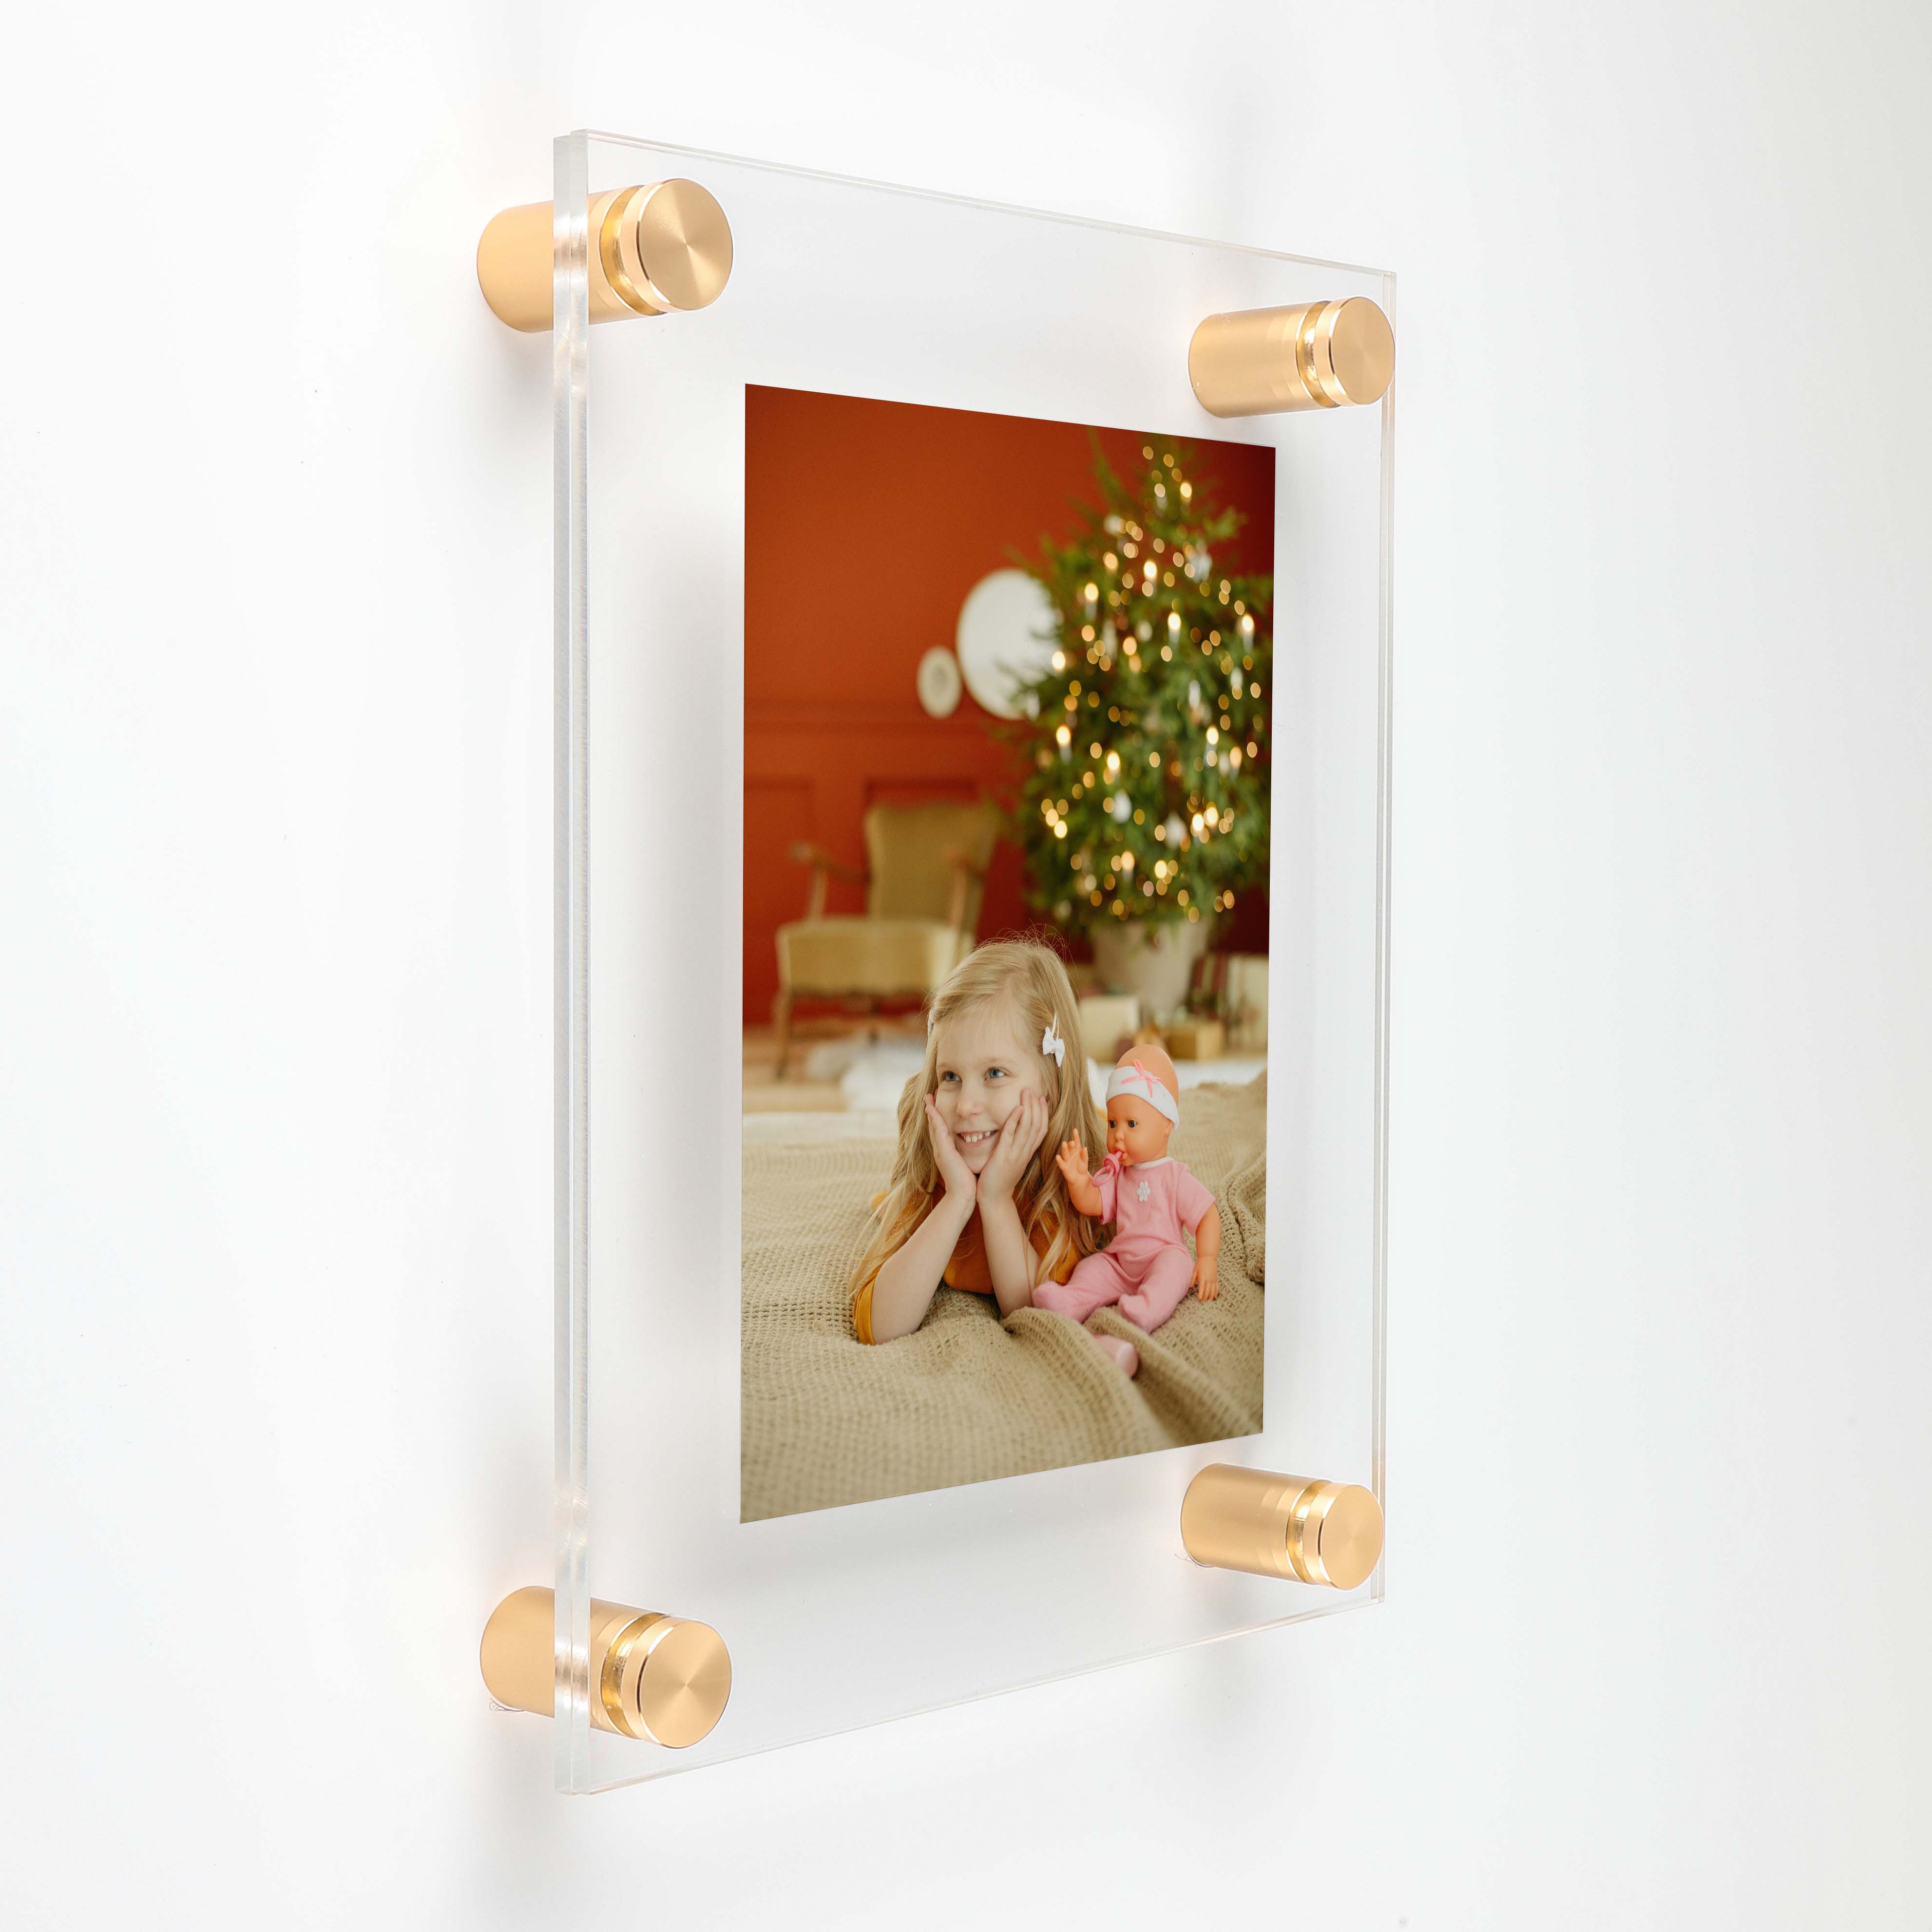 (2) 23-3/4'' x 29-3/4'' Clear Acrylics , Pre-Drilled With Polished Edges (Thick 3/16'' each), Wall Frame with (4) 5/8'' x 3/4'' Champagne Anodized Aluminum Standoffs includes Screws and Anchors